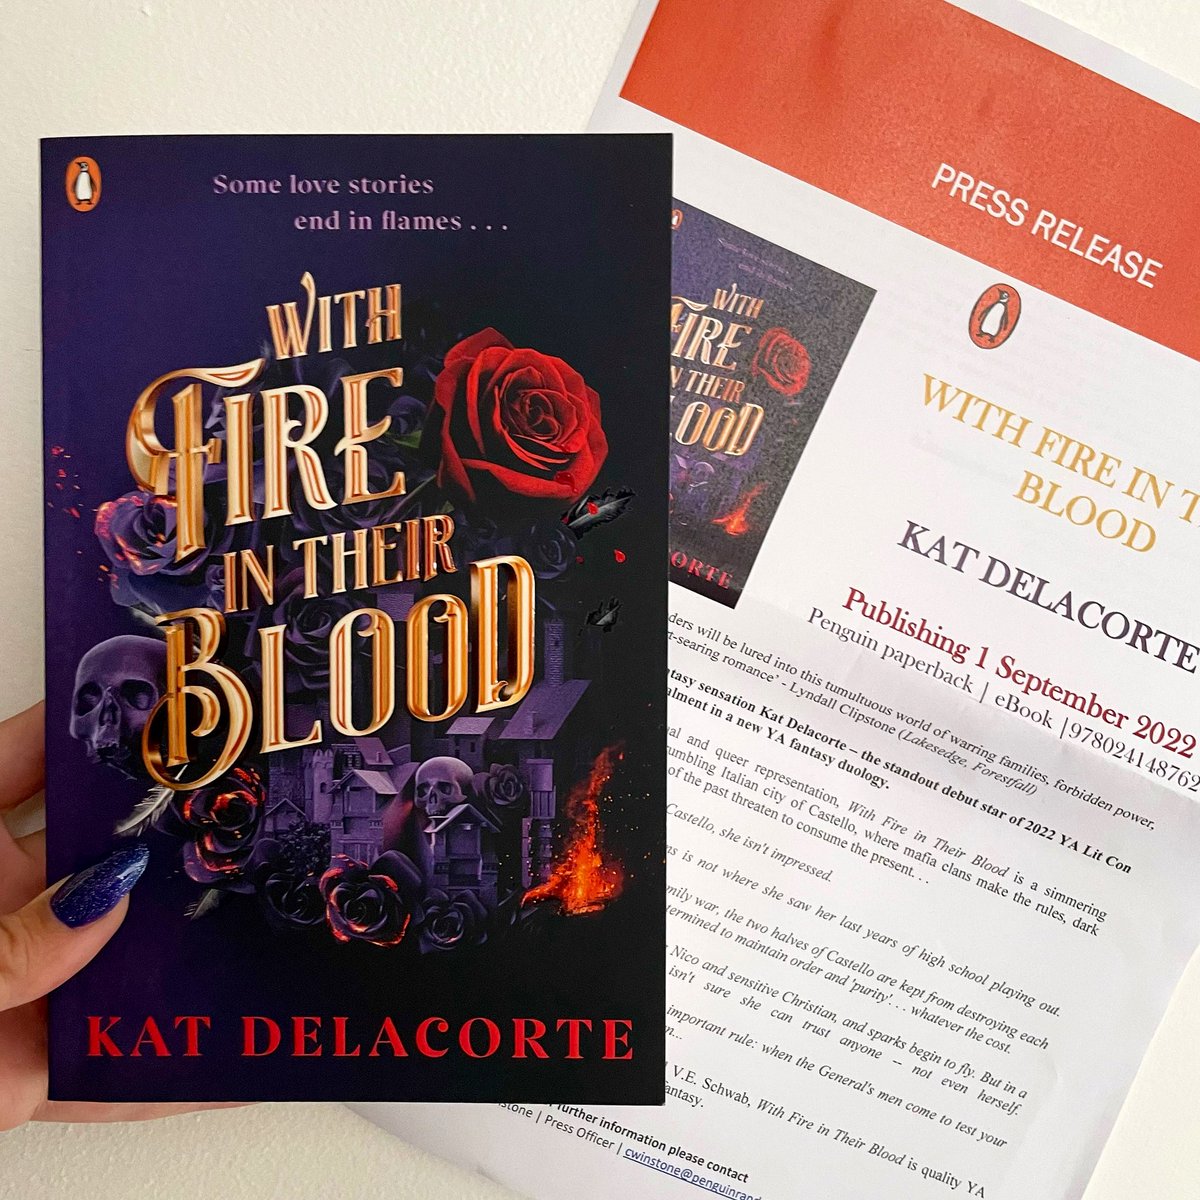 Today’s #bookmail! 🎉🎉

A huge thank you to @The_WriteReads @penguinplatform for my gorgeous #gifted copy of #WithFireInTheirBlood by @katdelacorte for the upcoming @WriteReadsTours #UltimateBlogTour!

I can’t wait to read it😍😍

#thewritereads #blogtour #booktwt #booktwitter